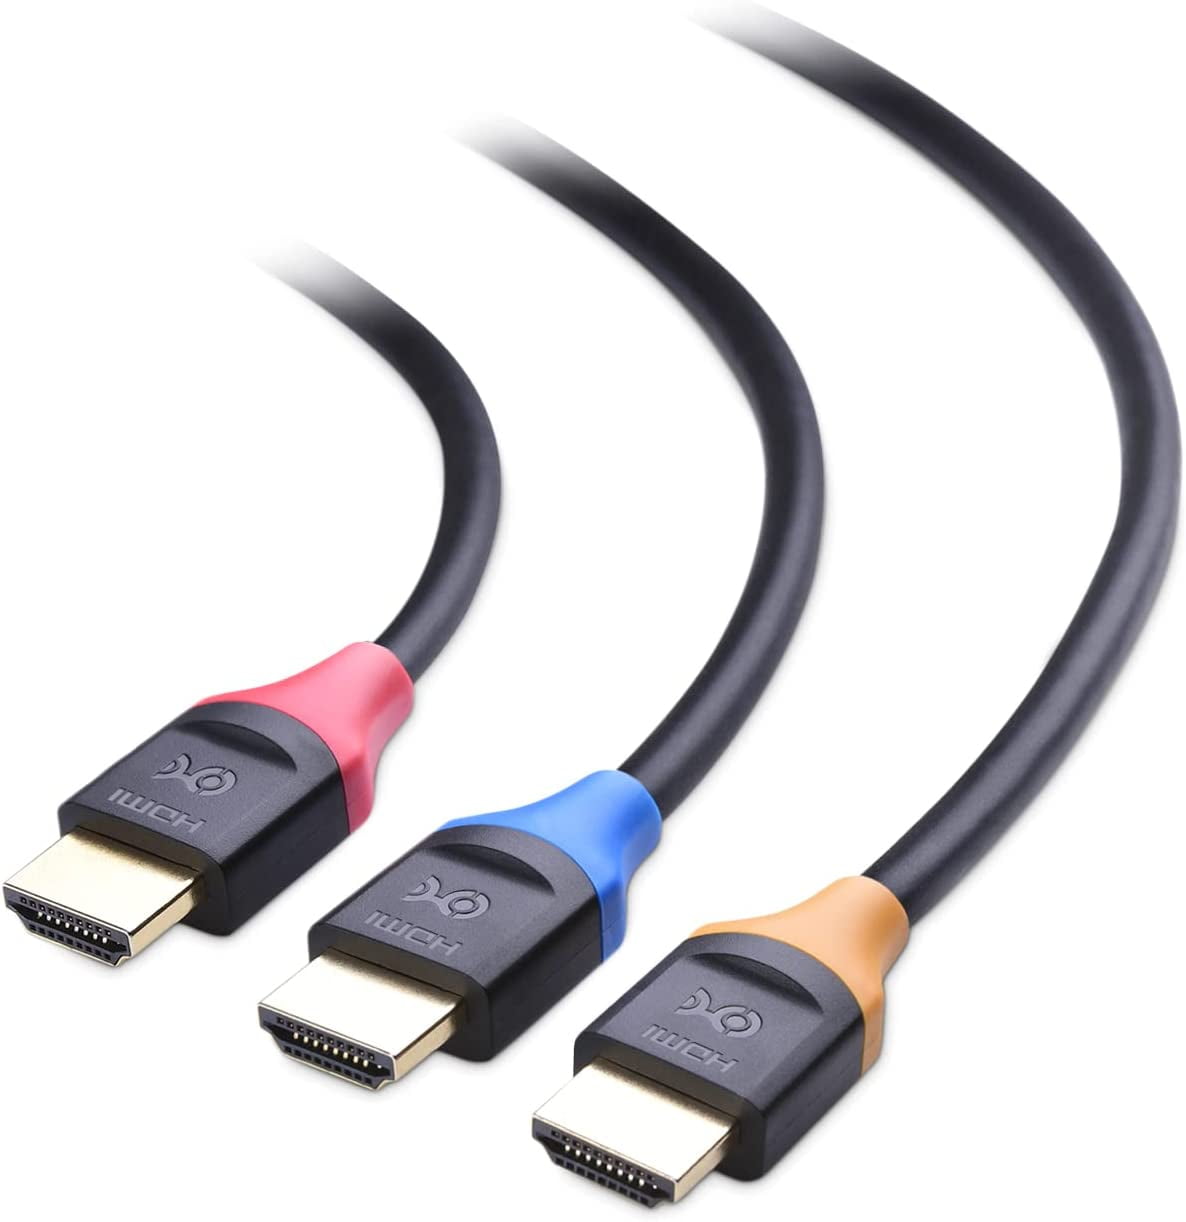 interval Udøve sport personale Cable Matters 3-Pack High Speed HDMI Cable 6 ft with 4K @60Hz, 2K @144Hz,  FreeSync, G-SYNC and HDR Support for Gaming Monitor, PC, Apple TV, and More  - Walmart.com